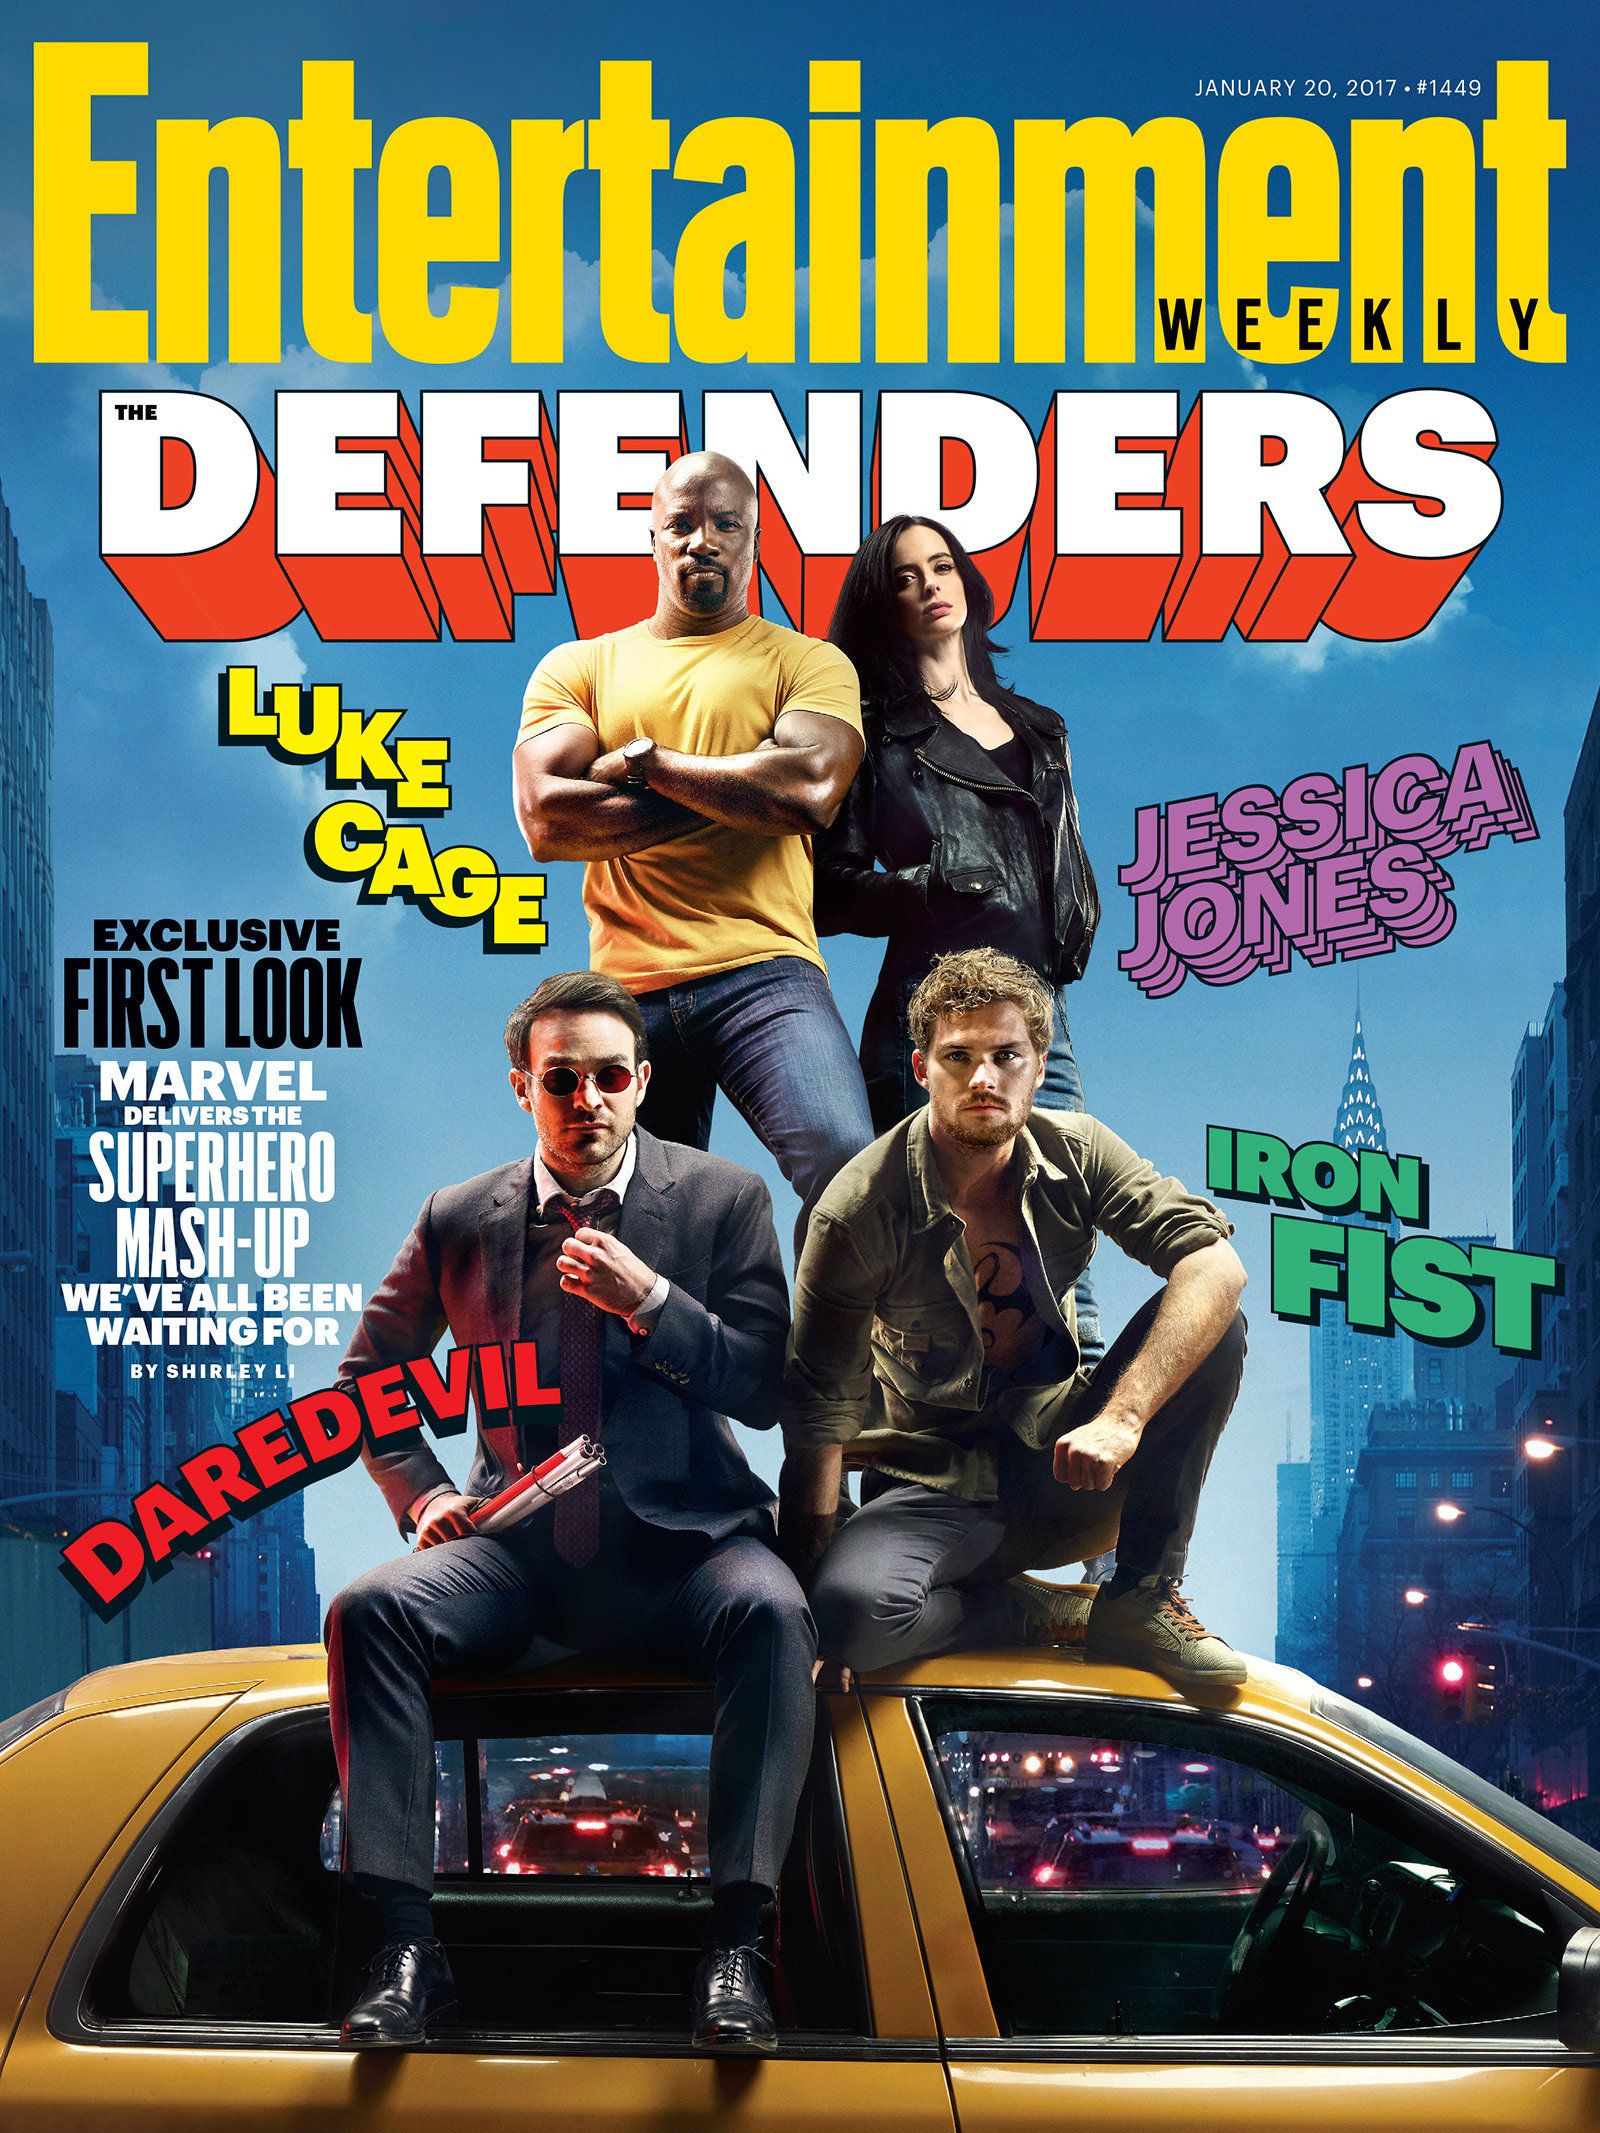 Marvel's The Defenders EW cover